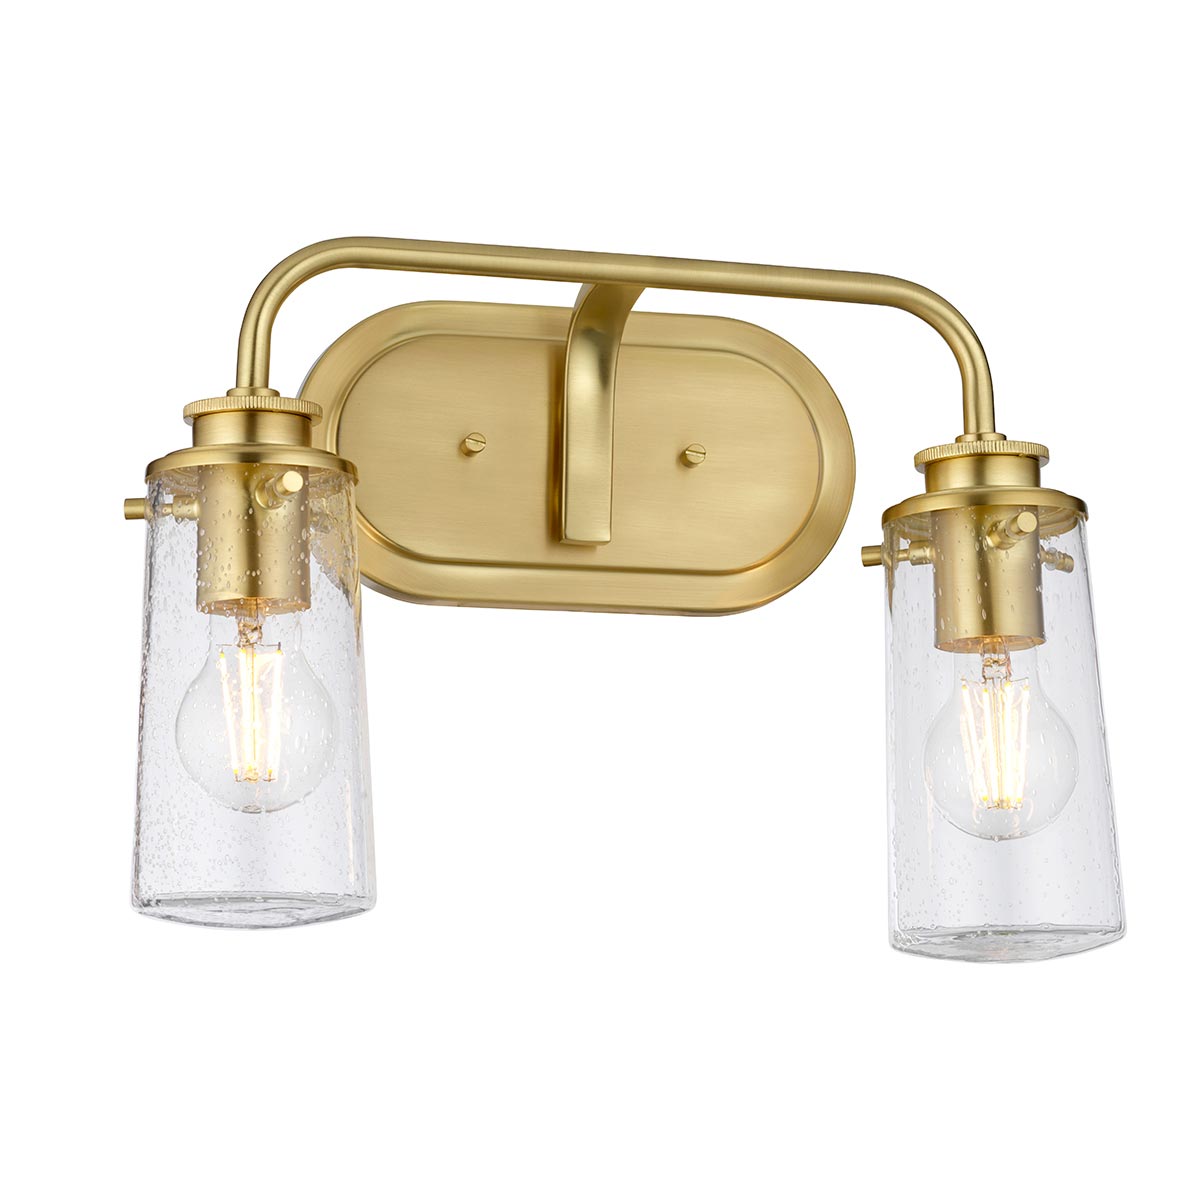 Braelyn Brushed Brass 2 Lamp Bathroom Wall Light Seeded Glass Shades